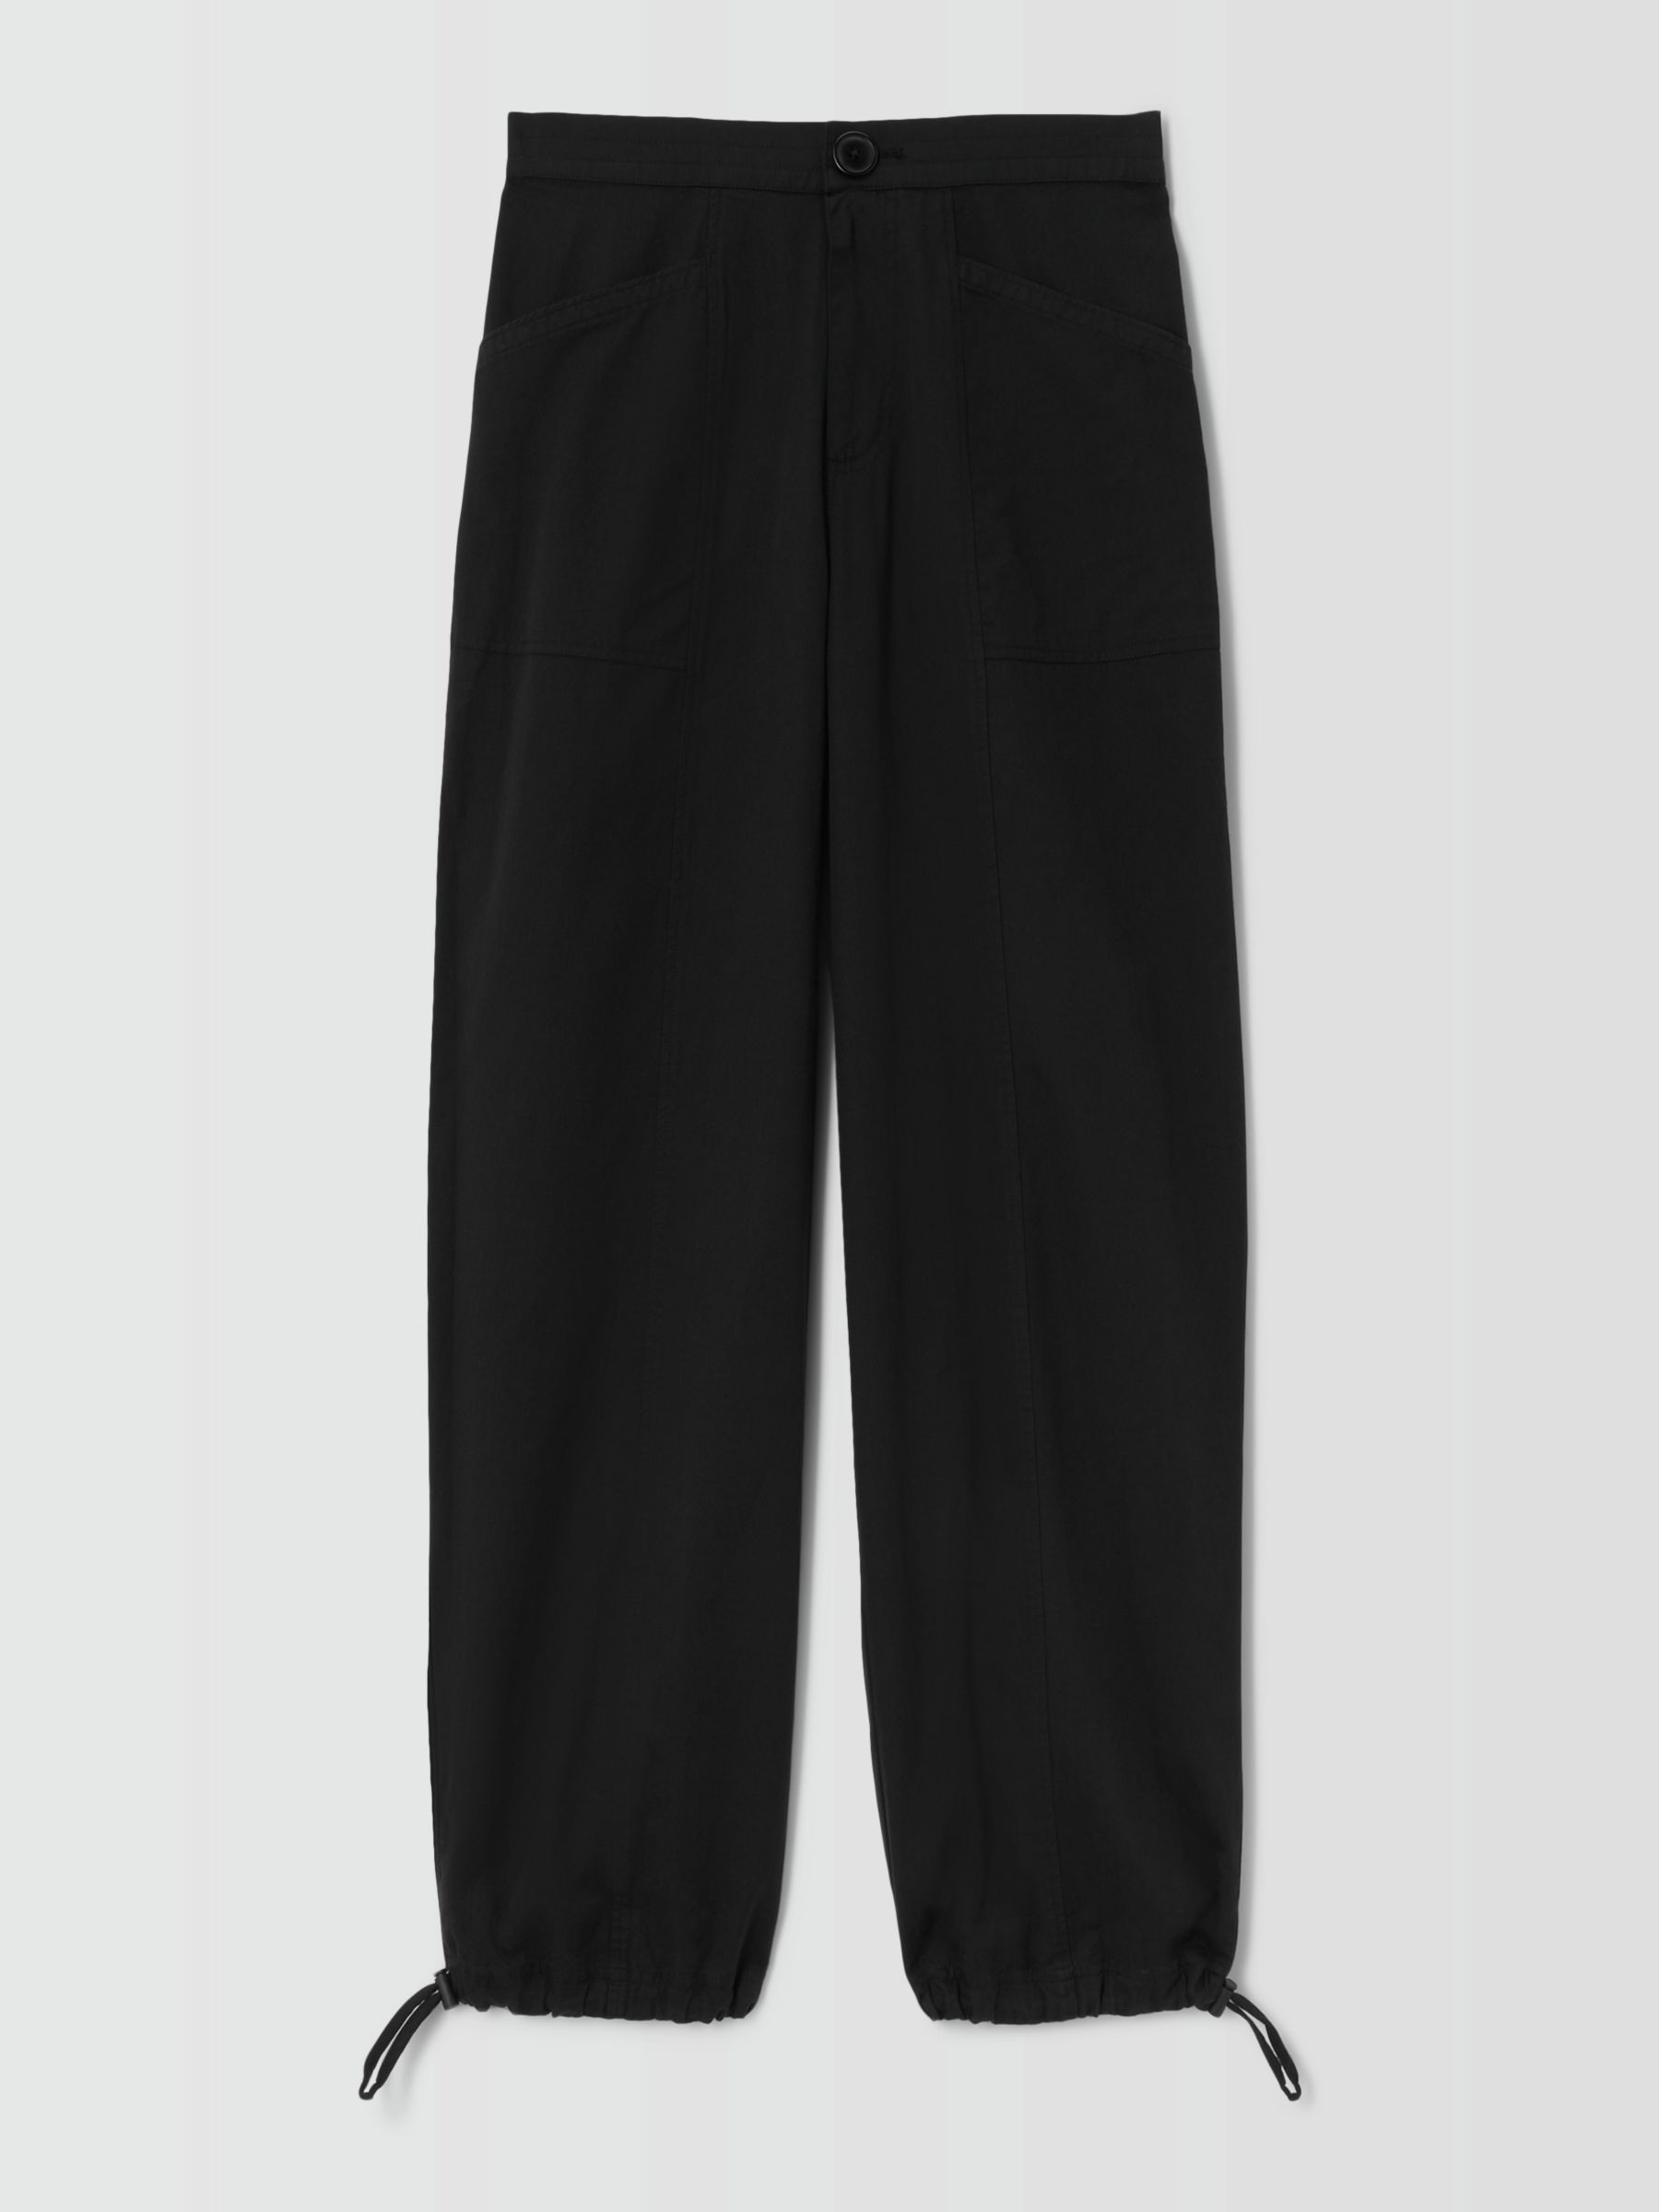 Buy John Lewis ANYDAY Tie Utility Trousers Online at johnlewis.com